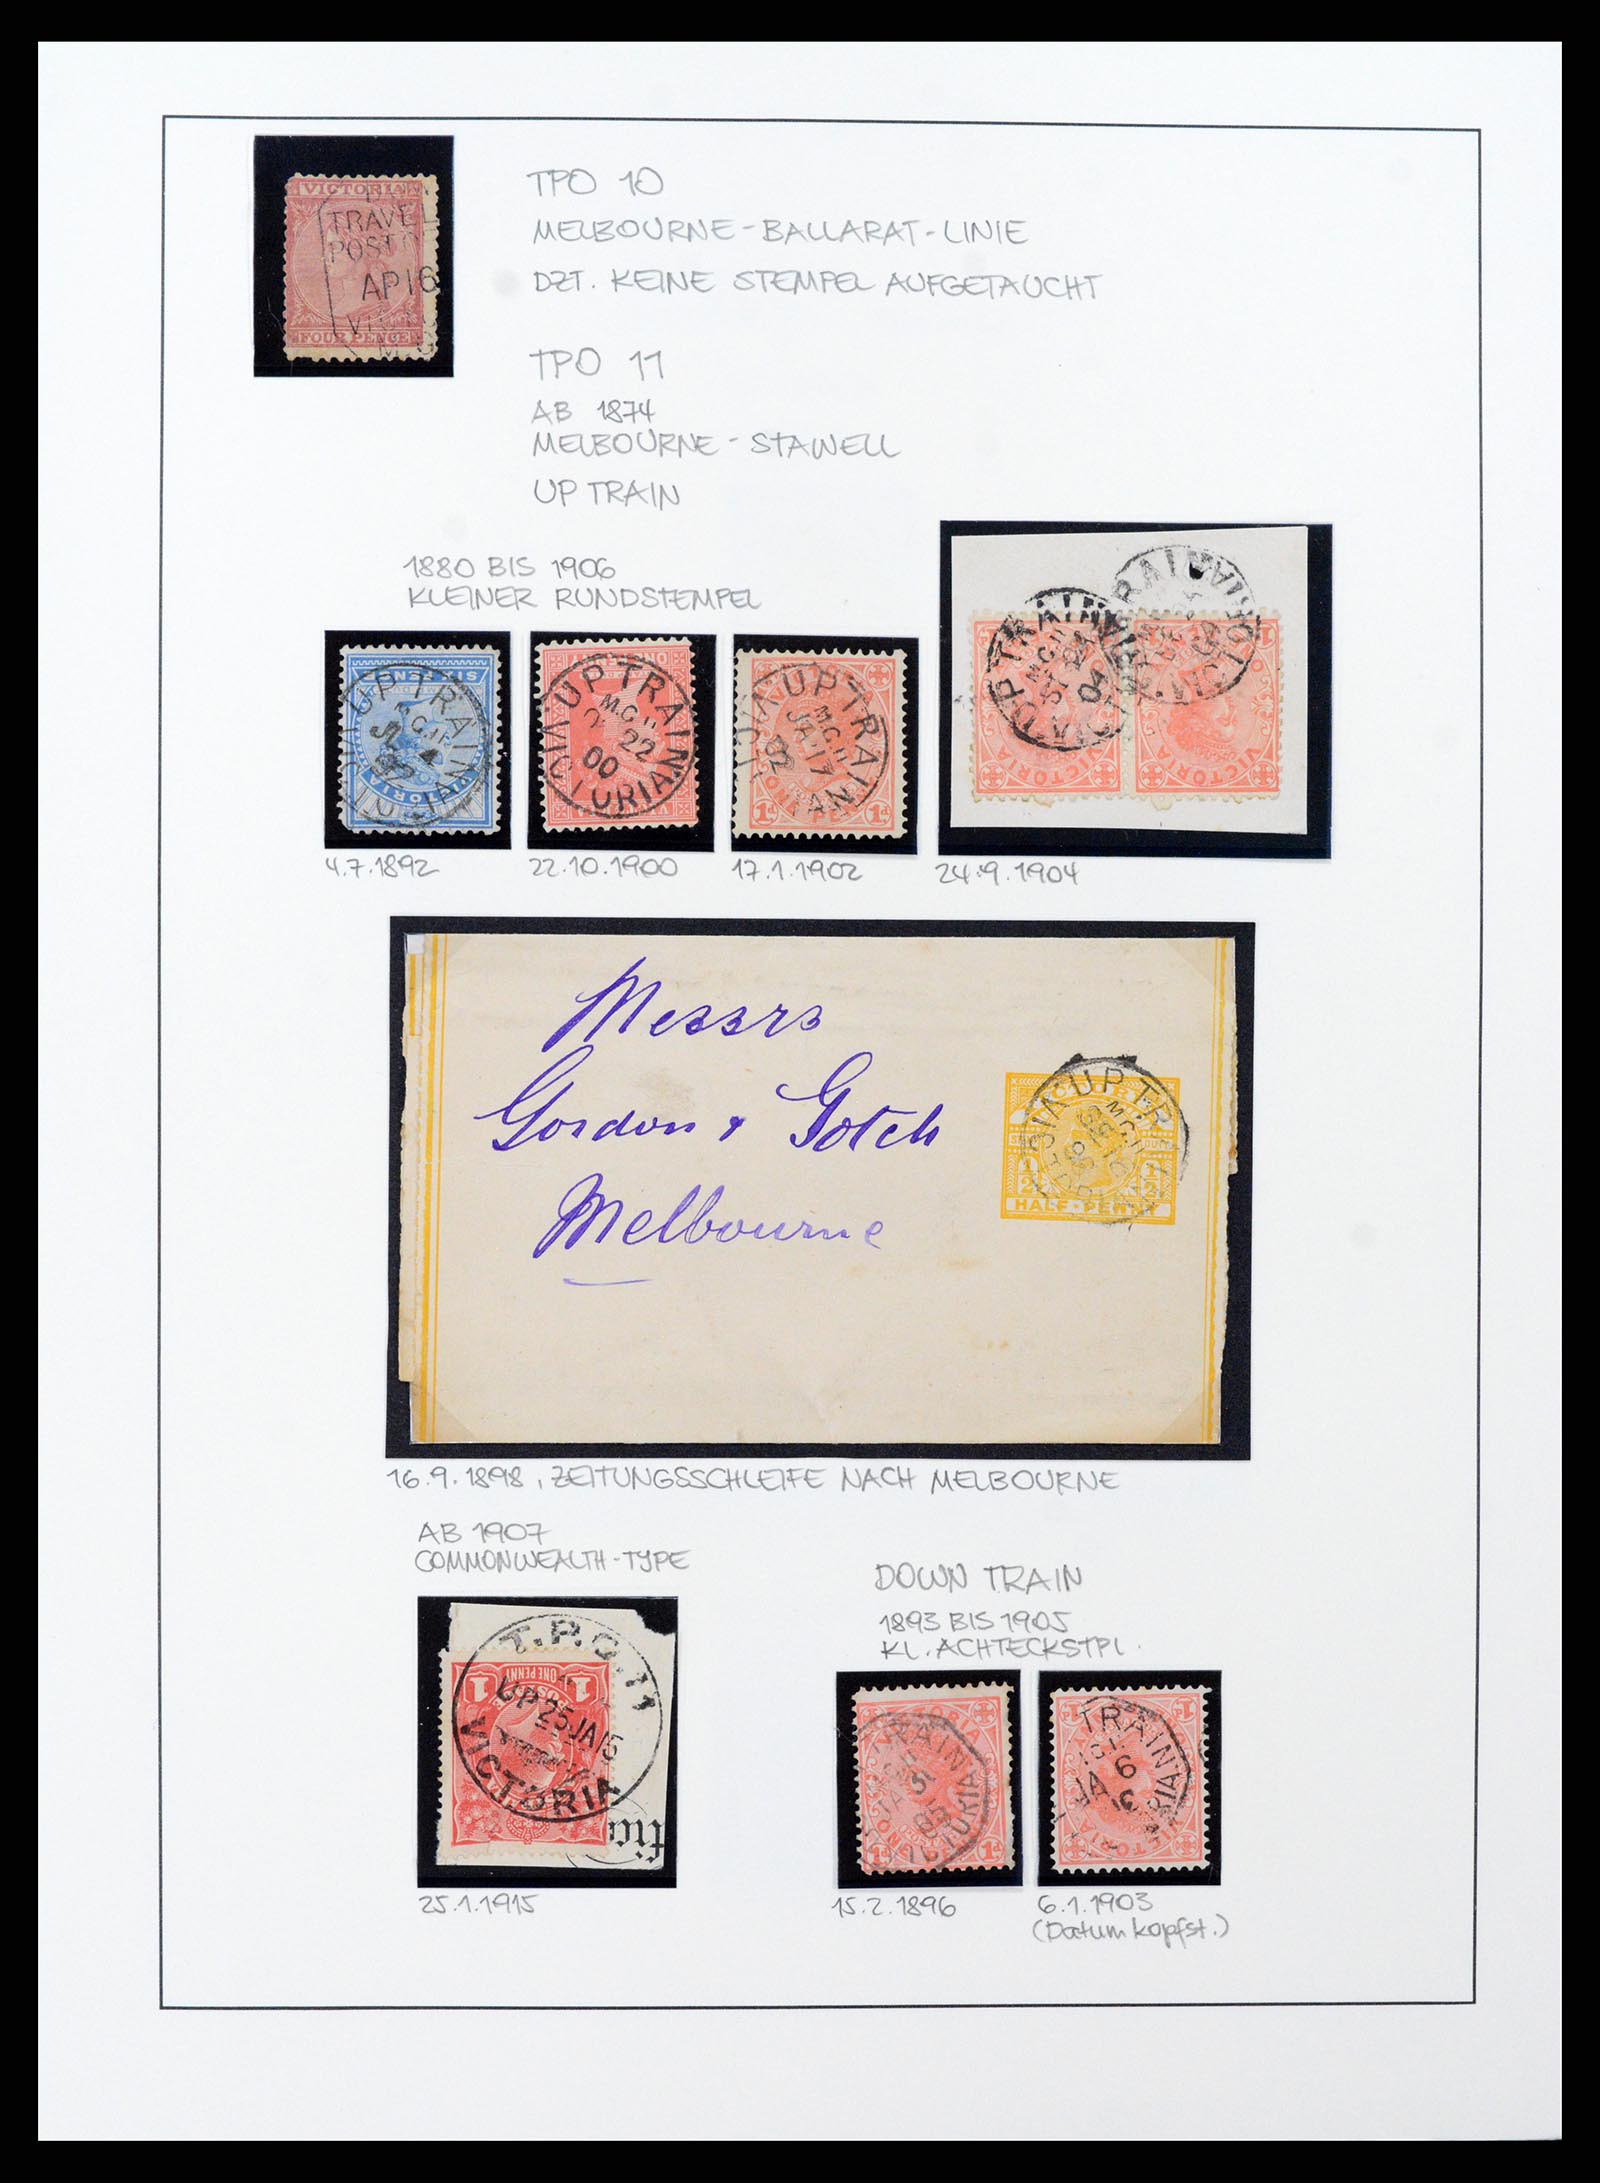 37514 017 - Stamp collection 37514 Victoria tpo cancellations 1865-1930.